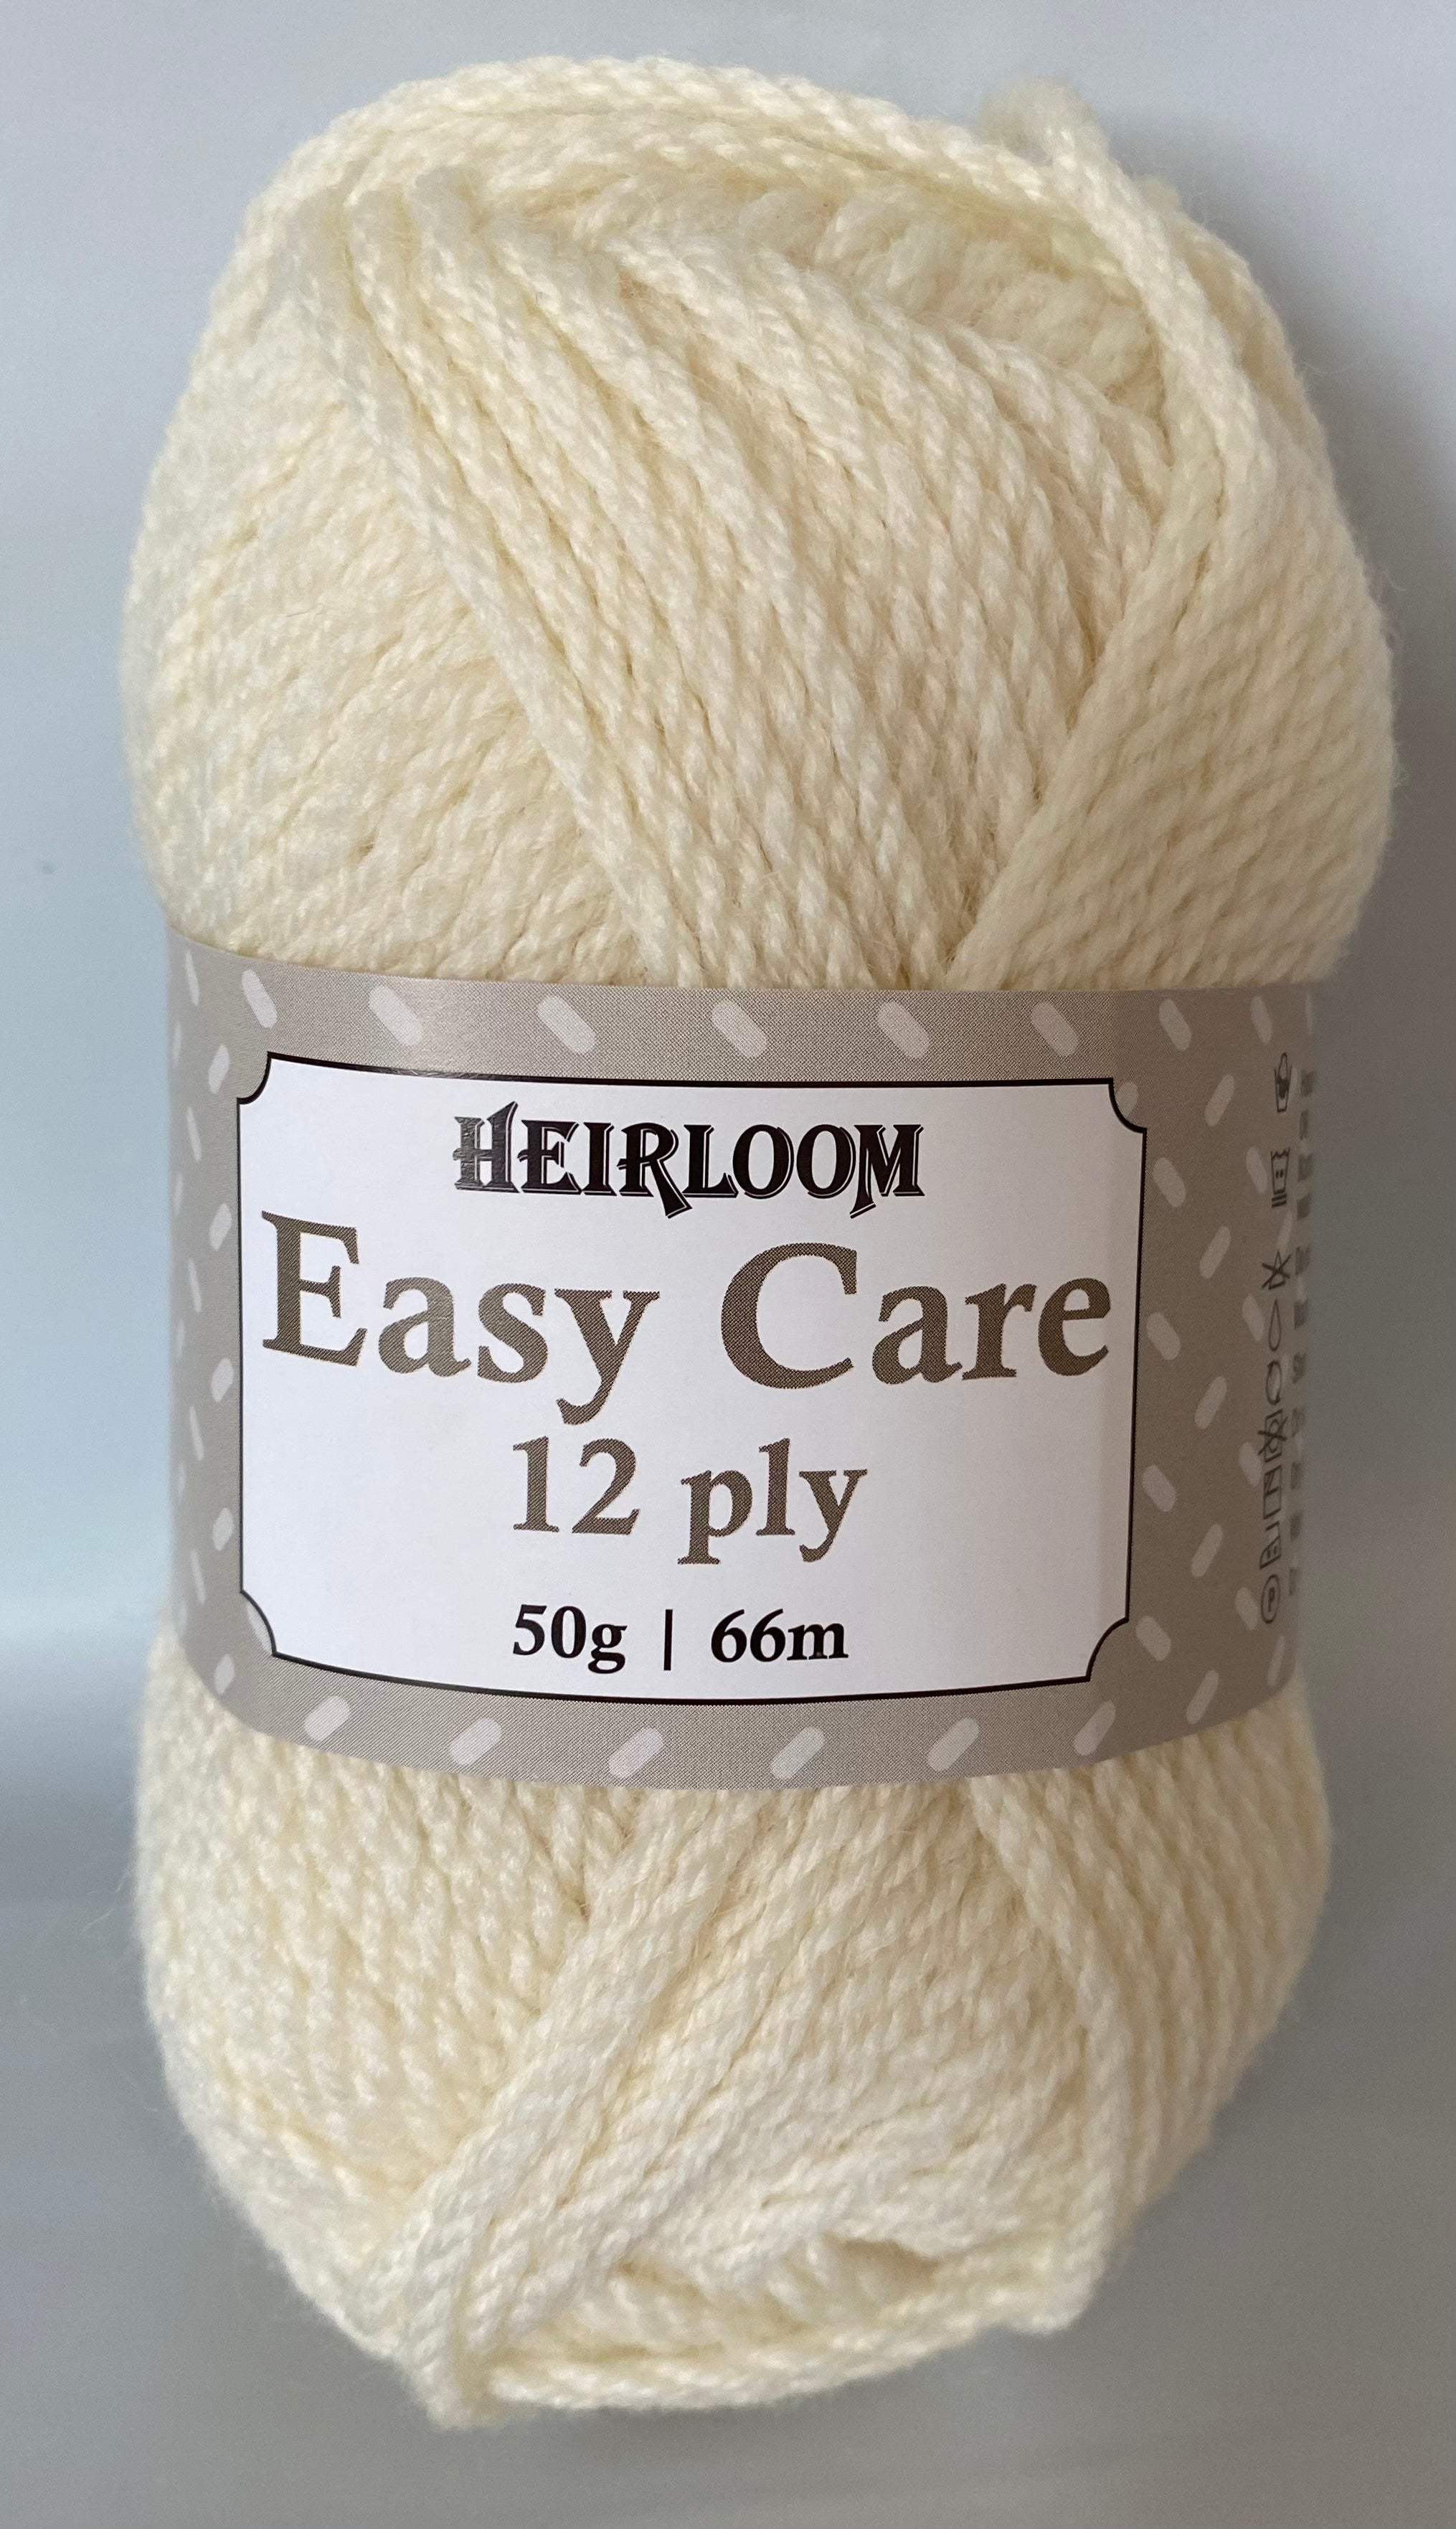 Quality 12 Ply Yarn For Sale Online